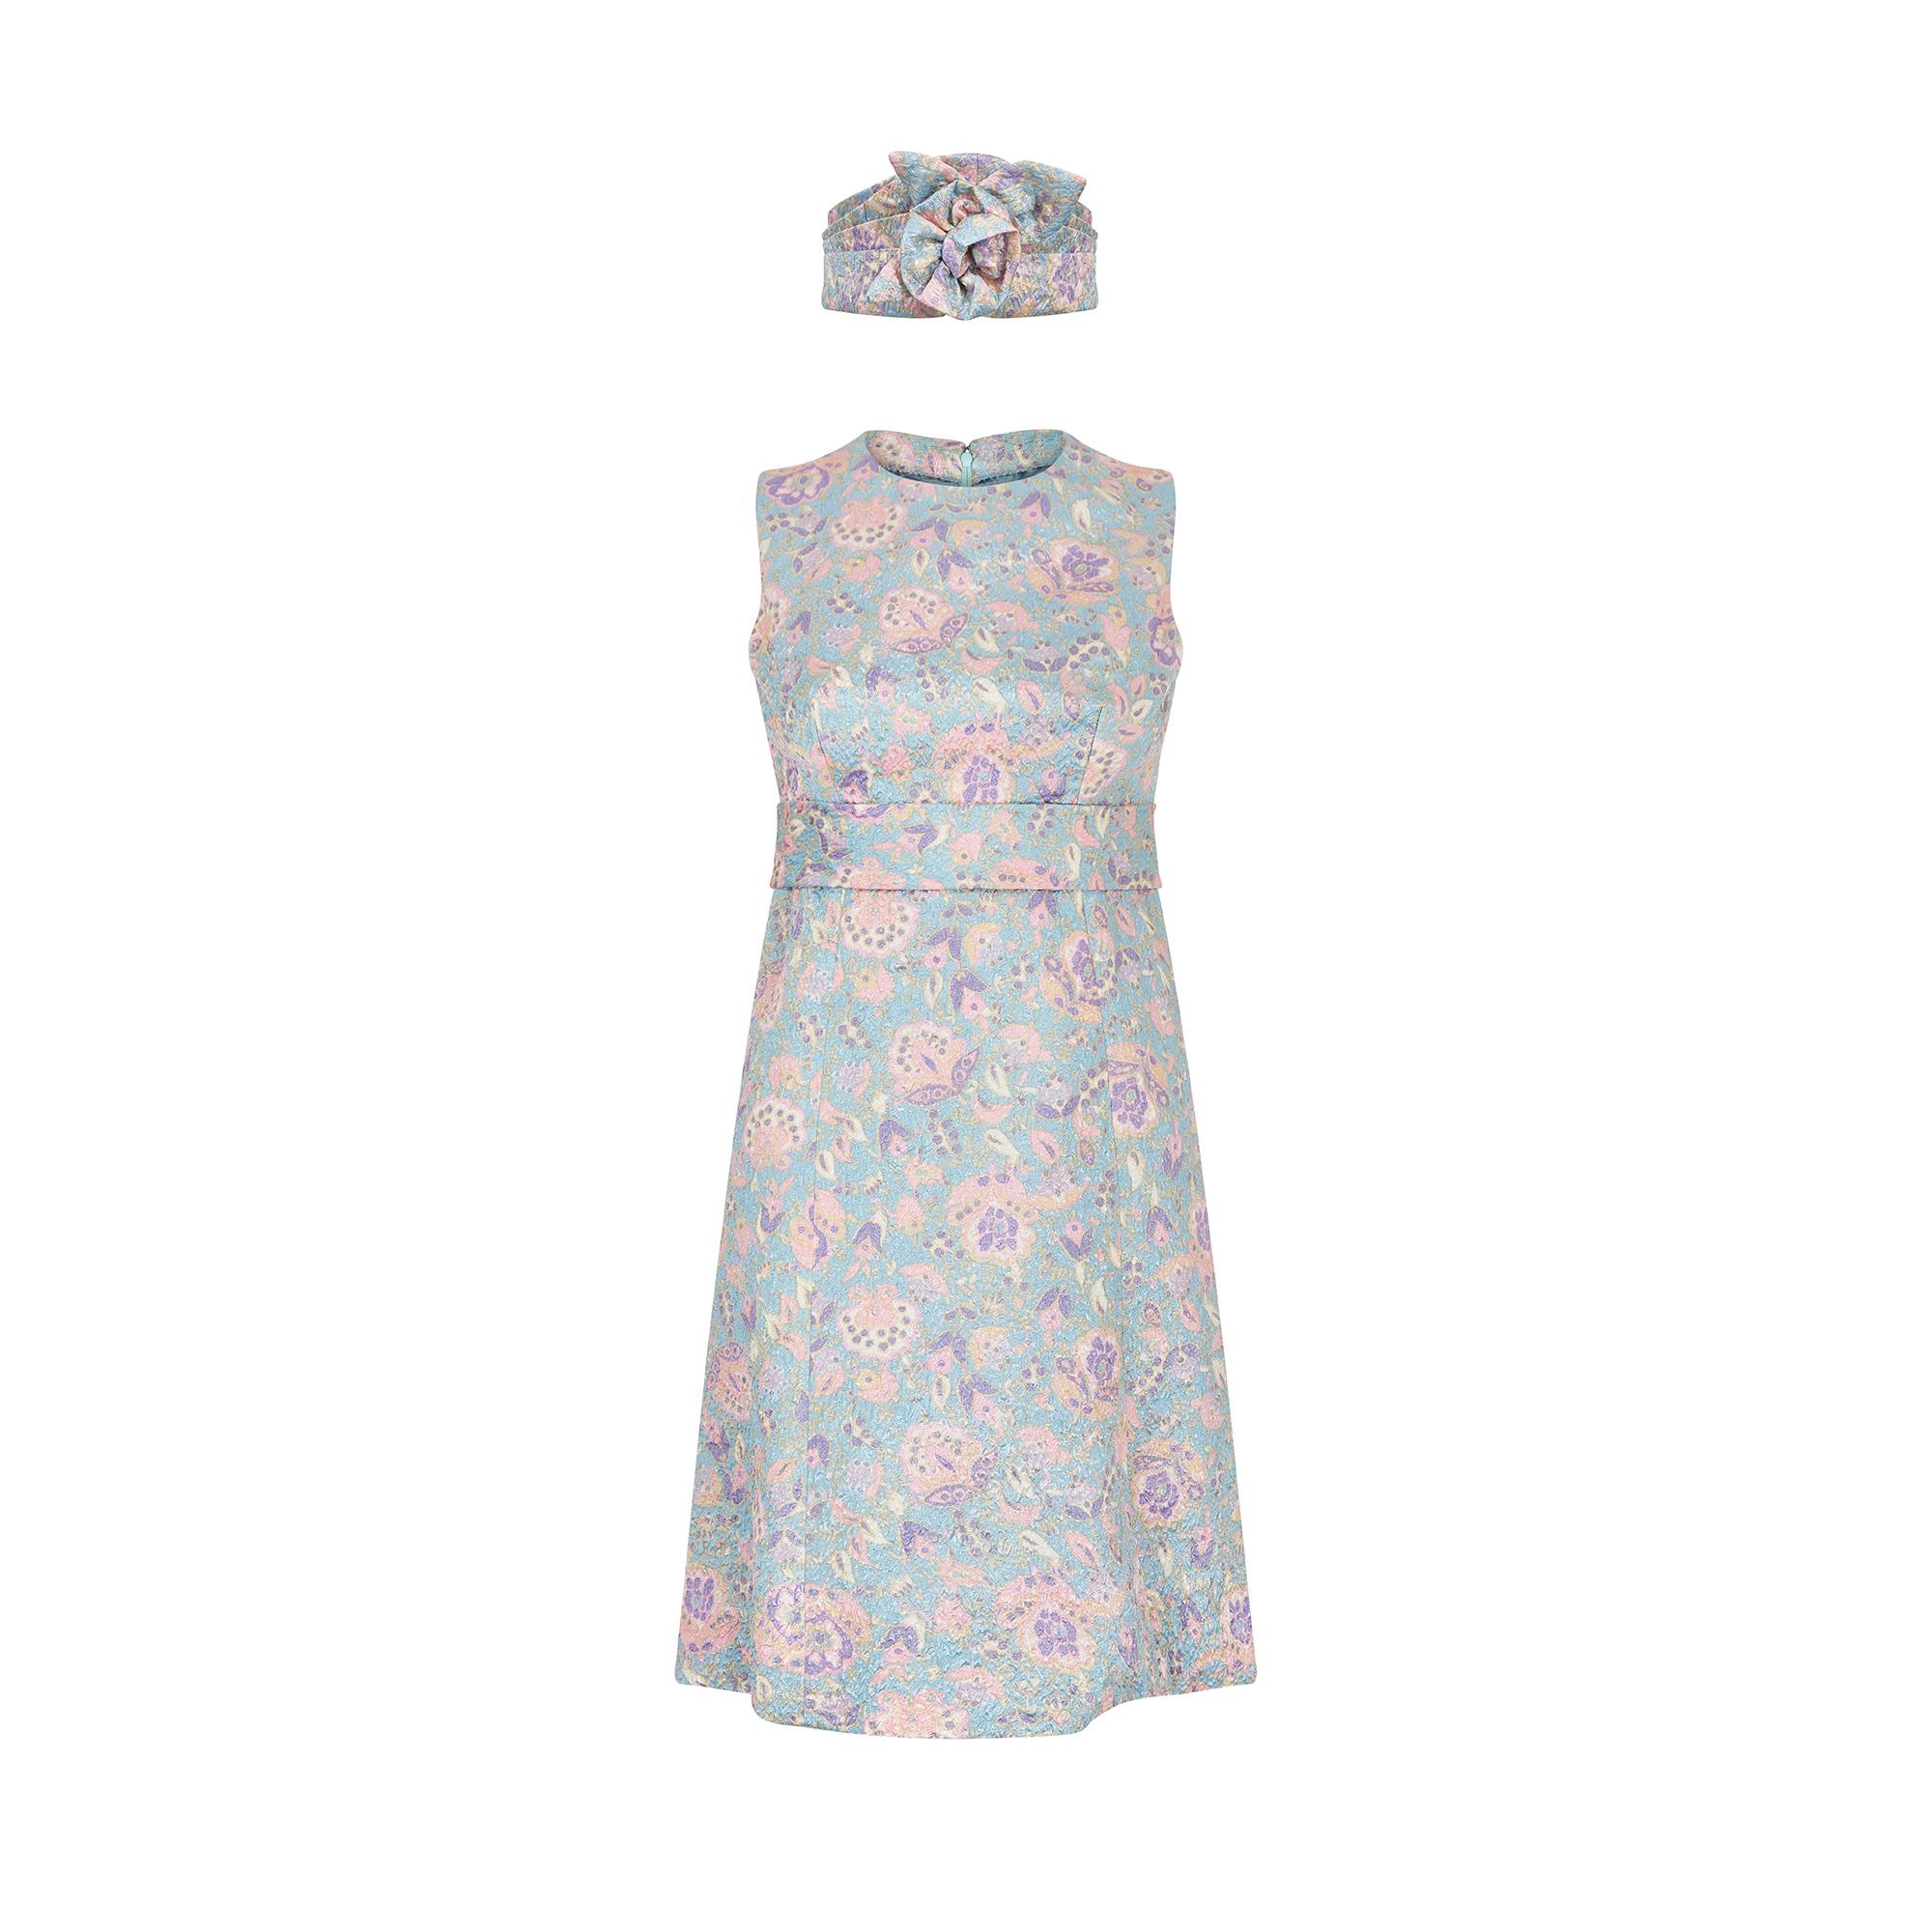 This French couture 1960s A-line mini dress has a wonderful luminosity to it thanks to its floral lame fabric. The neckline is high and softly rounded, and the interior is lined with a grey blue silky fabric. The exterior fabric is a silvery blue,